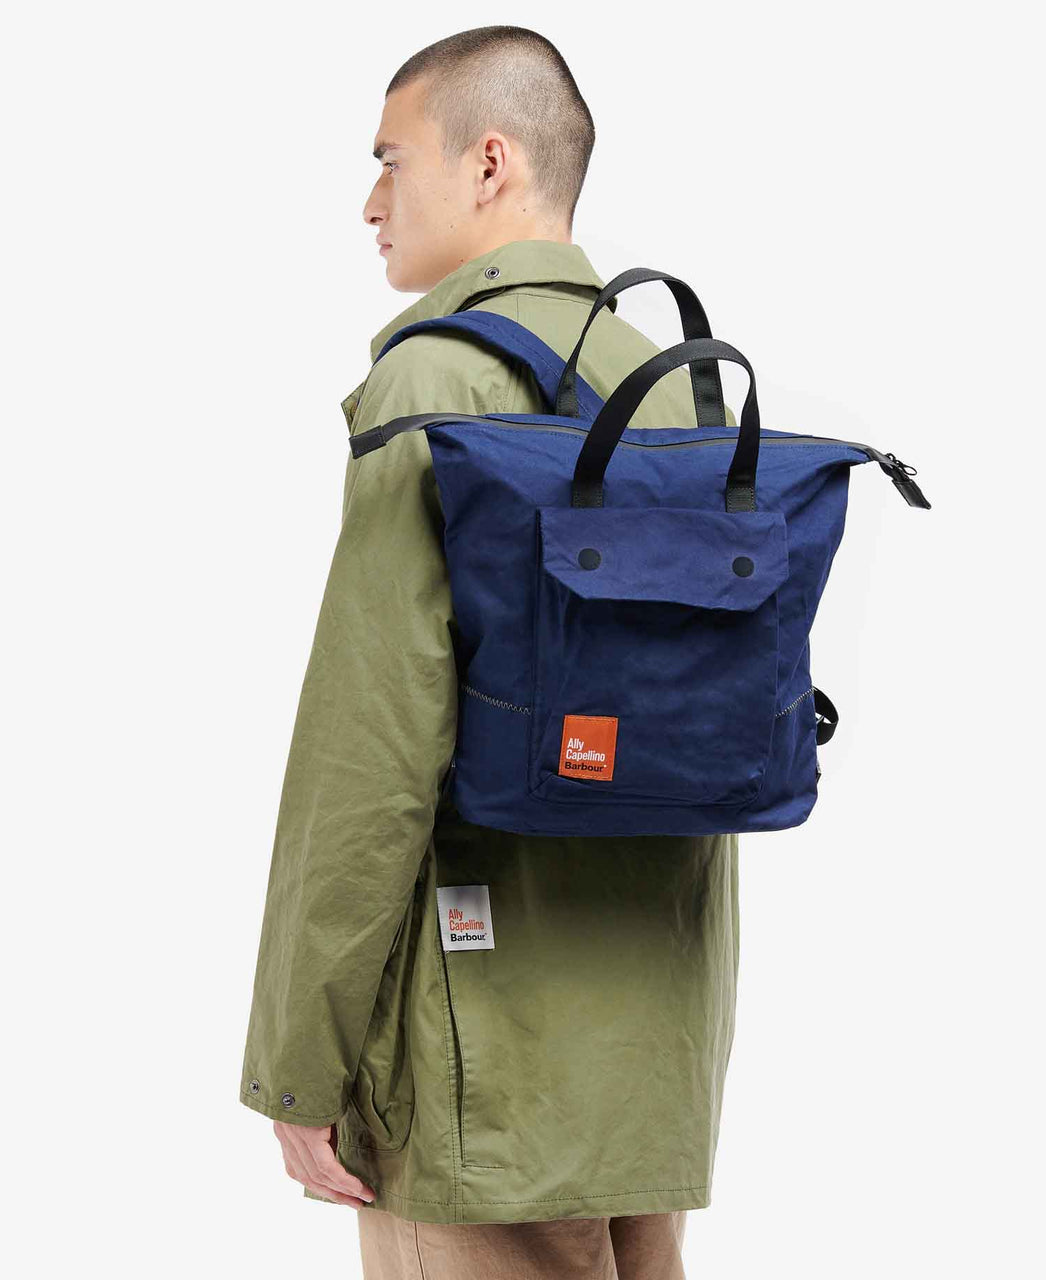 Ally Capellino x Barbour Ben Waxed Cotton Backpack in Navy